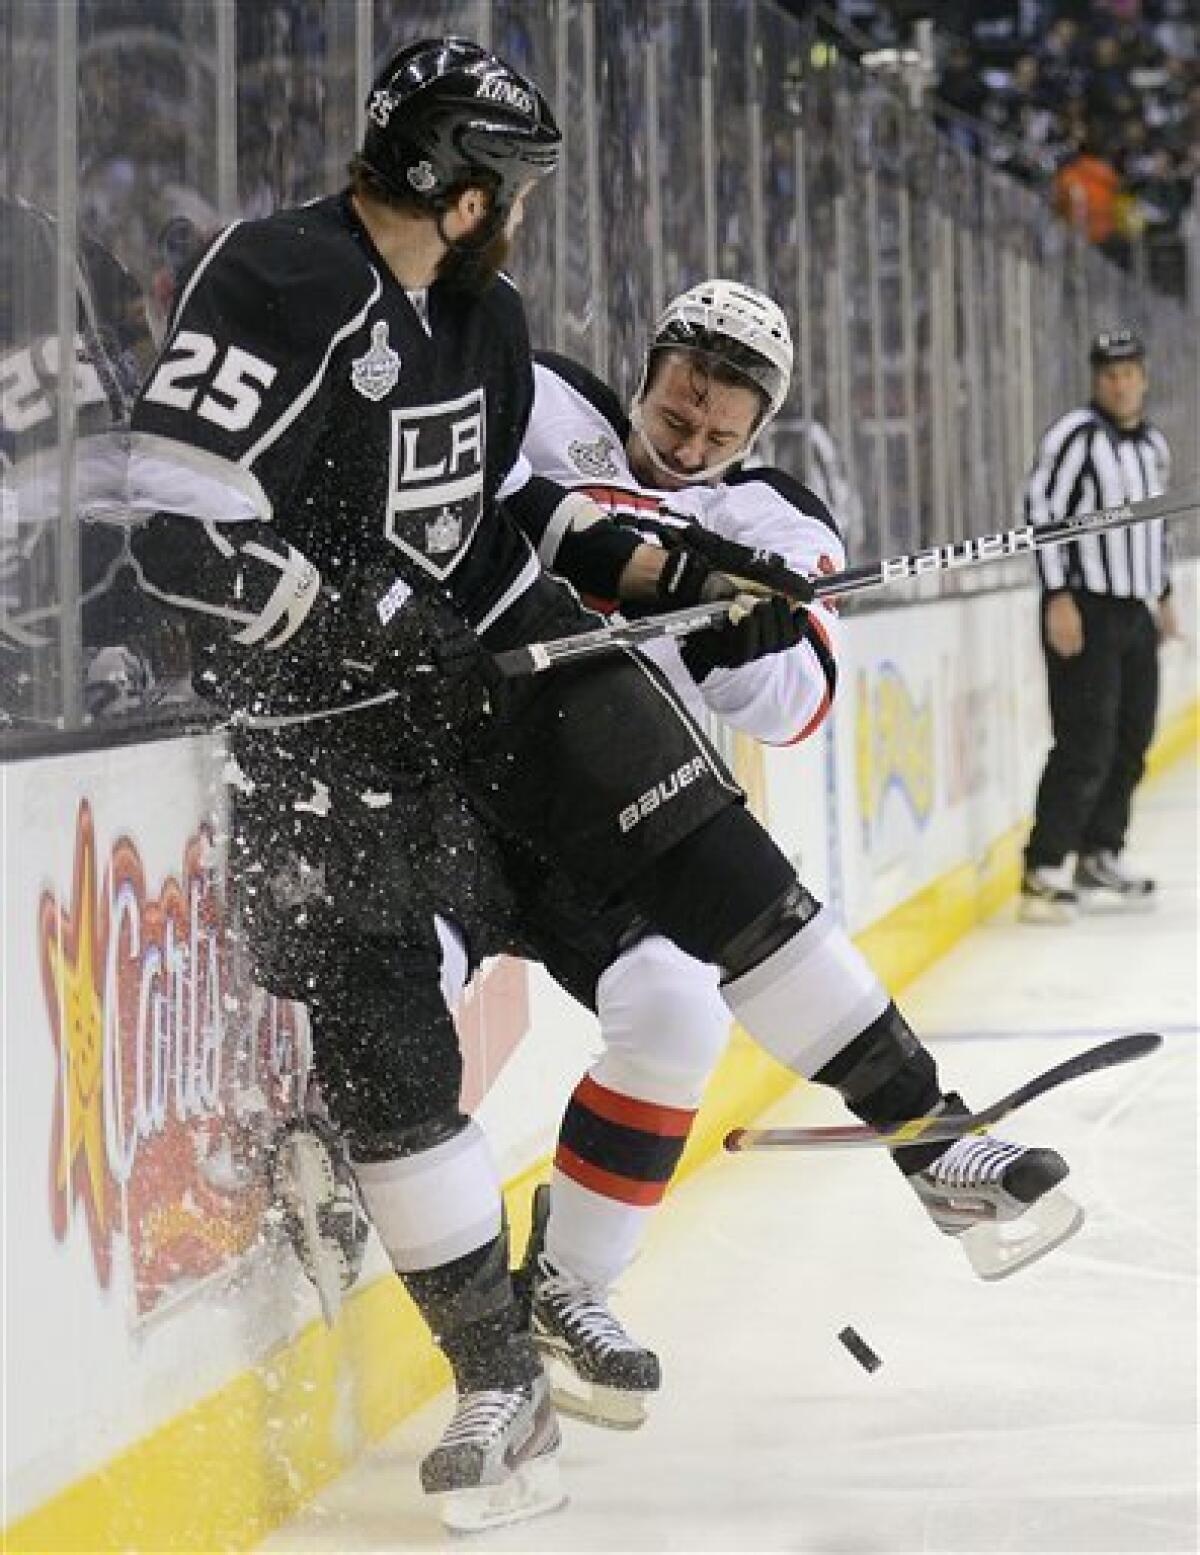 L.A. Kings lose to Devils, must wait for first Stanley Cup